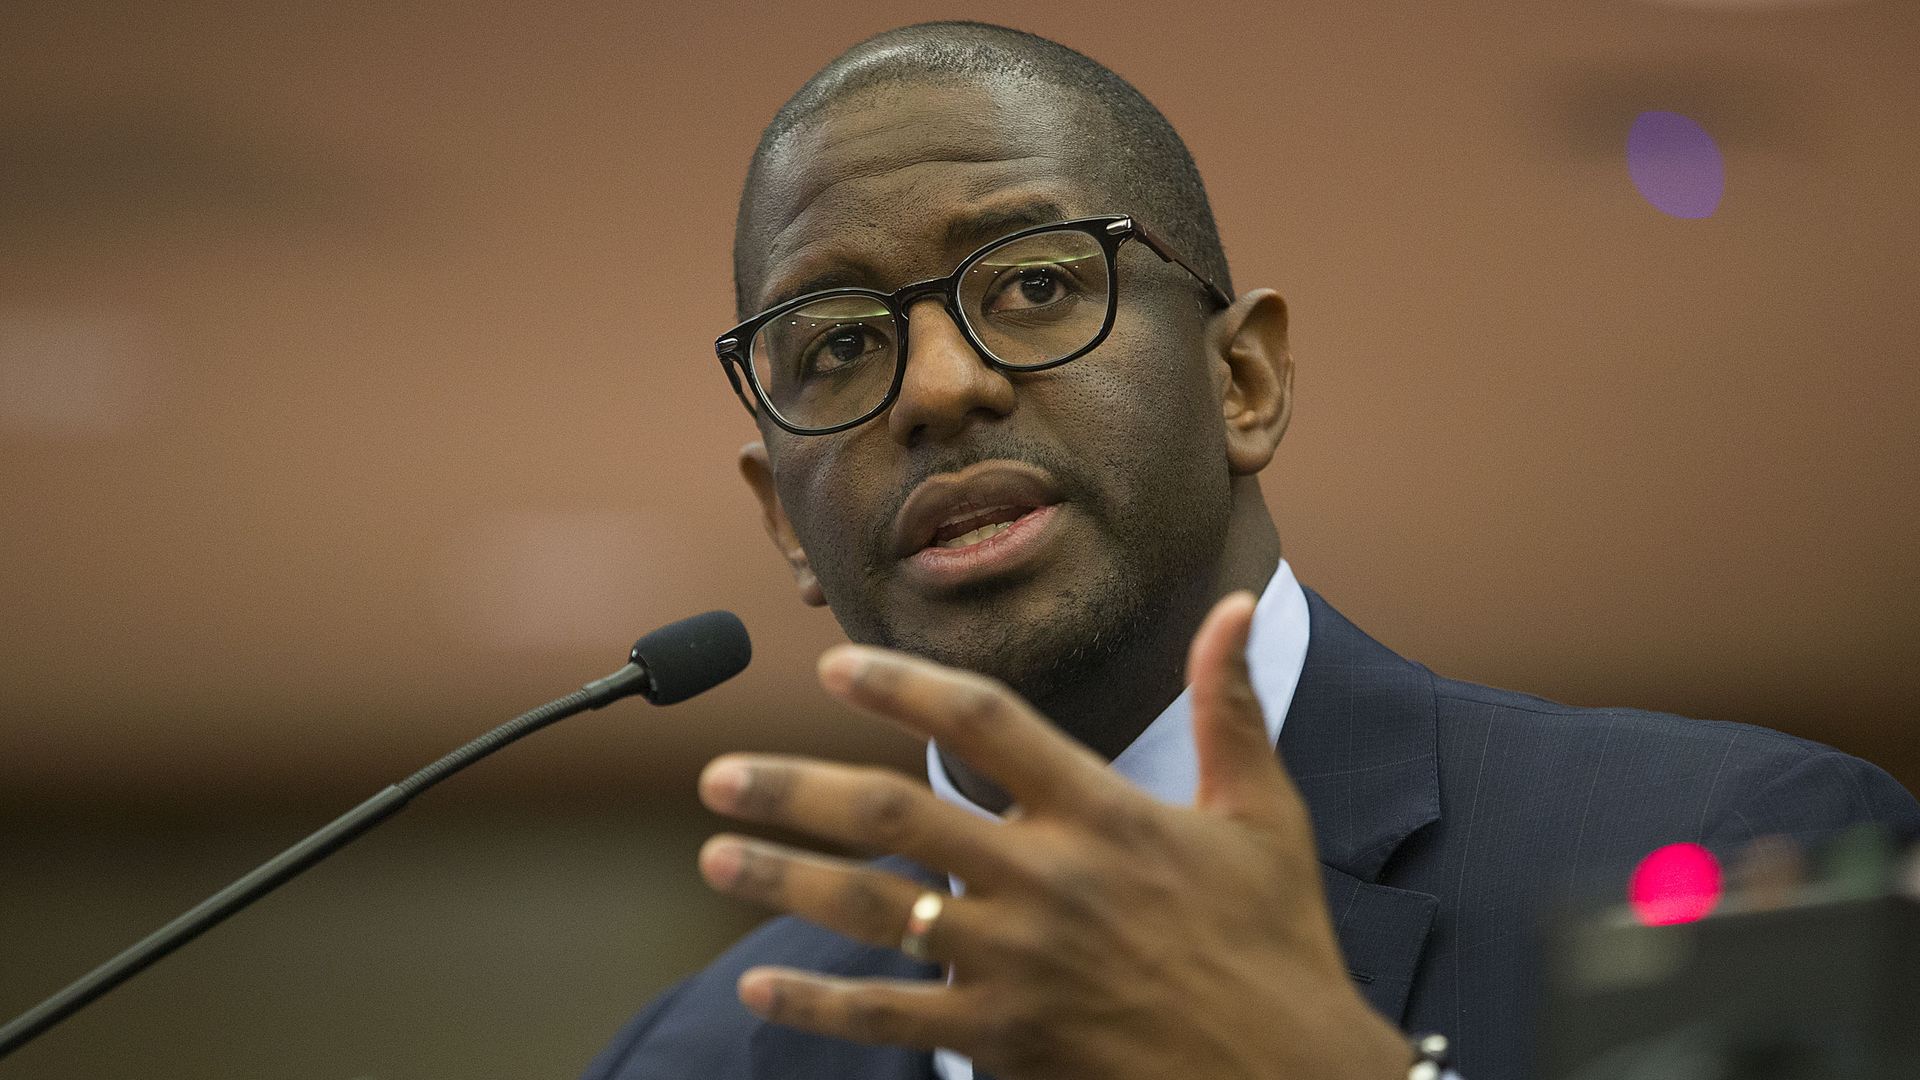 Andrew Gillum testifies on voting rights in this photo